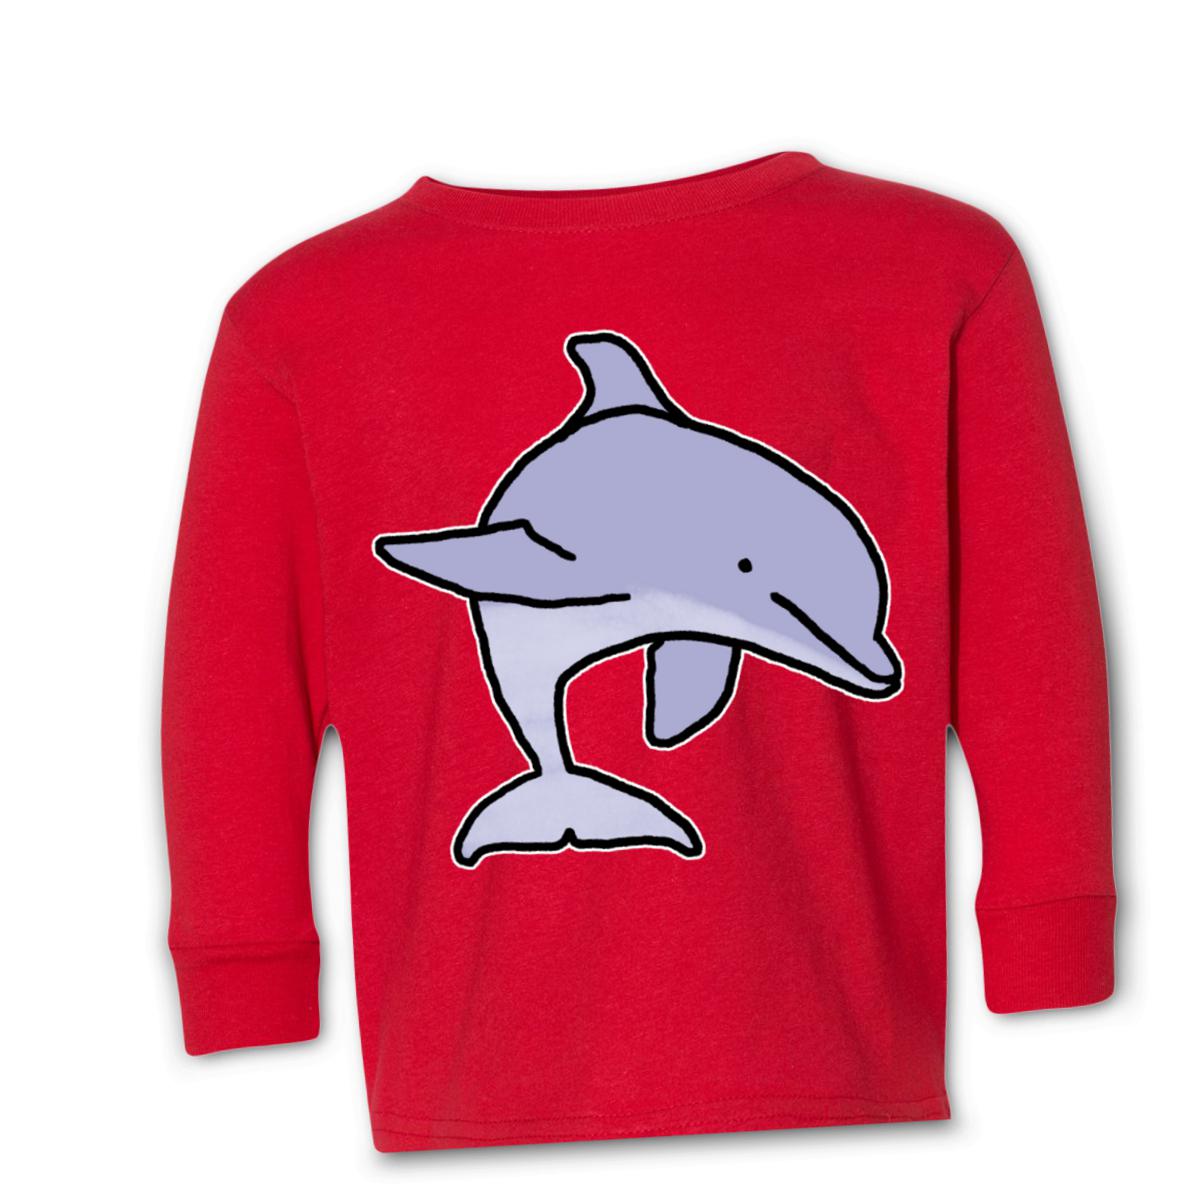 Dolphin Kid's Long Sleeve Tee Small red